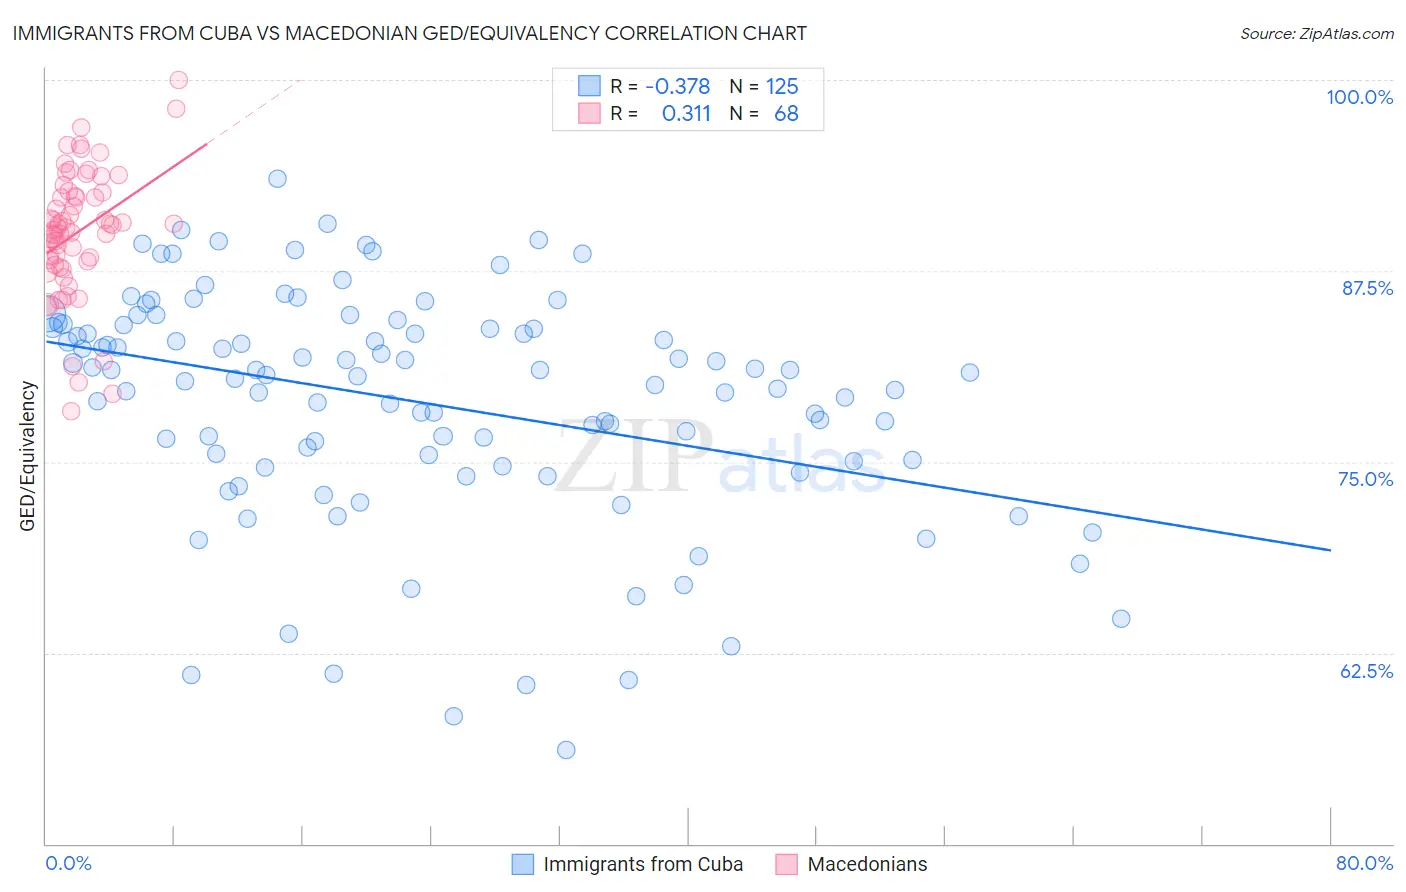 Immigrants from Cuba vs Macedonian GED/Equivalency